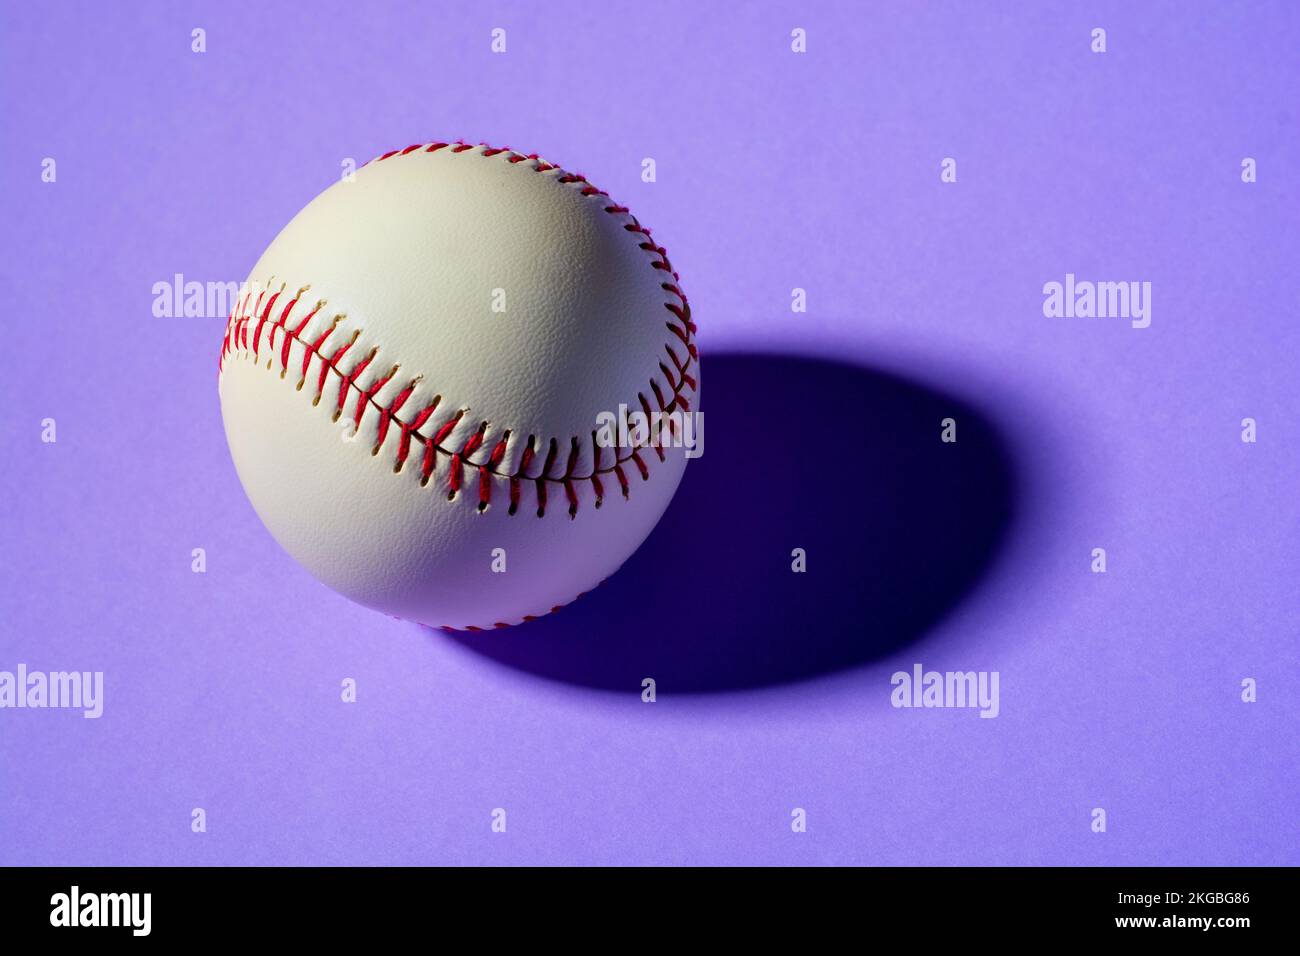 baseball ball on violet background close up with shadow. Stock Photo